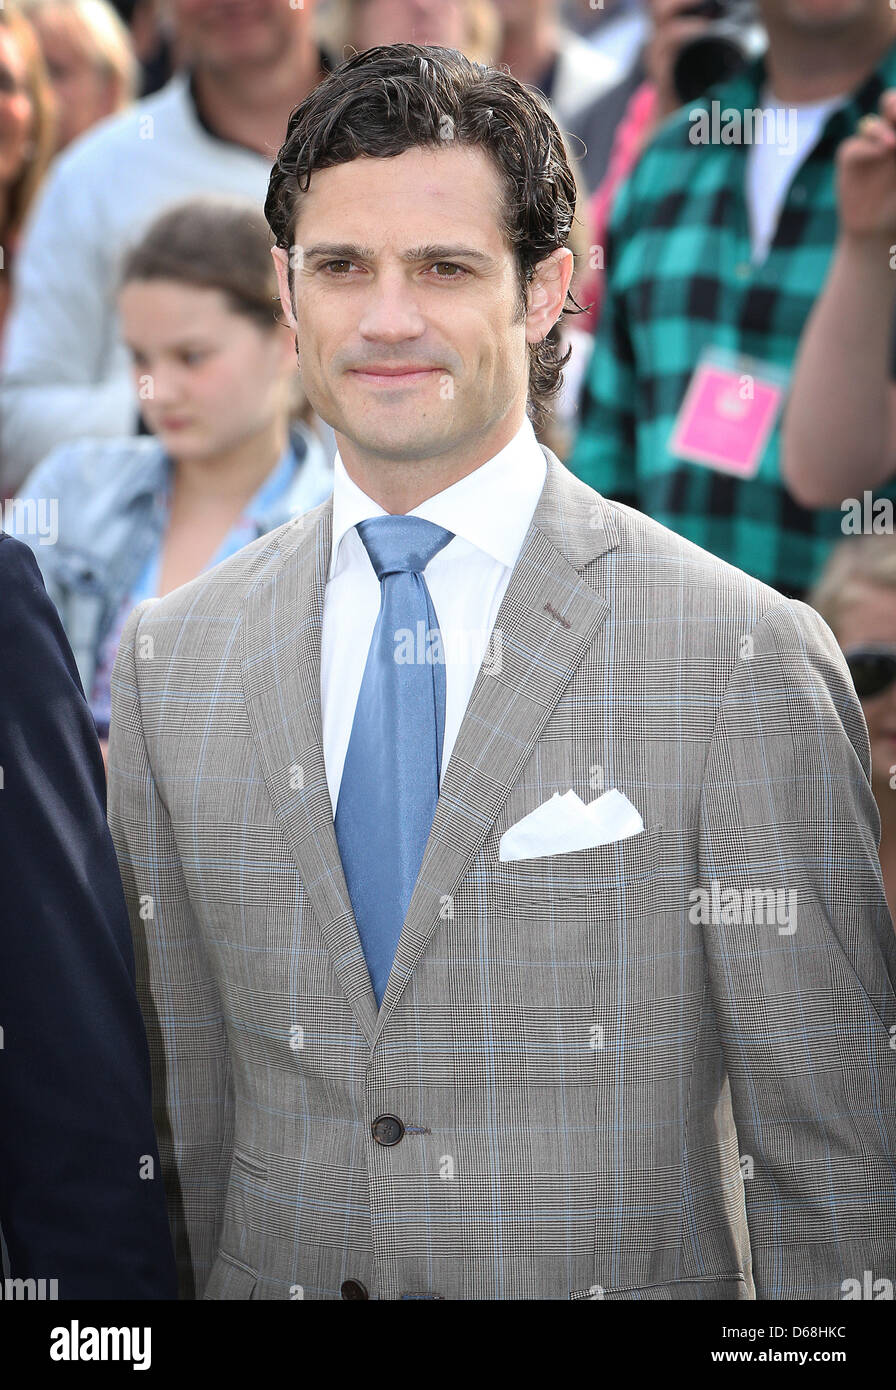 Sweden's Prince Carl Philip during the evening celebrations of Crown Princess Victoria's 35th birthday on 14 July 2012, in the city of Borgholm, on the island of Oland, where artists performed and Victoria handed out the annual Victoria scholarship. Photo: Patrick van Katwijk / NETHERLANDS OUT Stock Photo